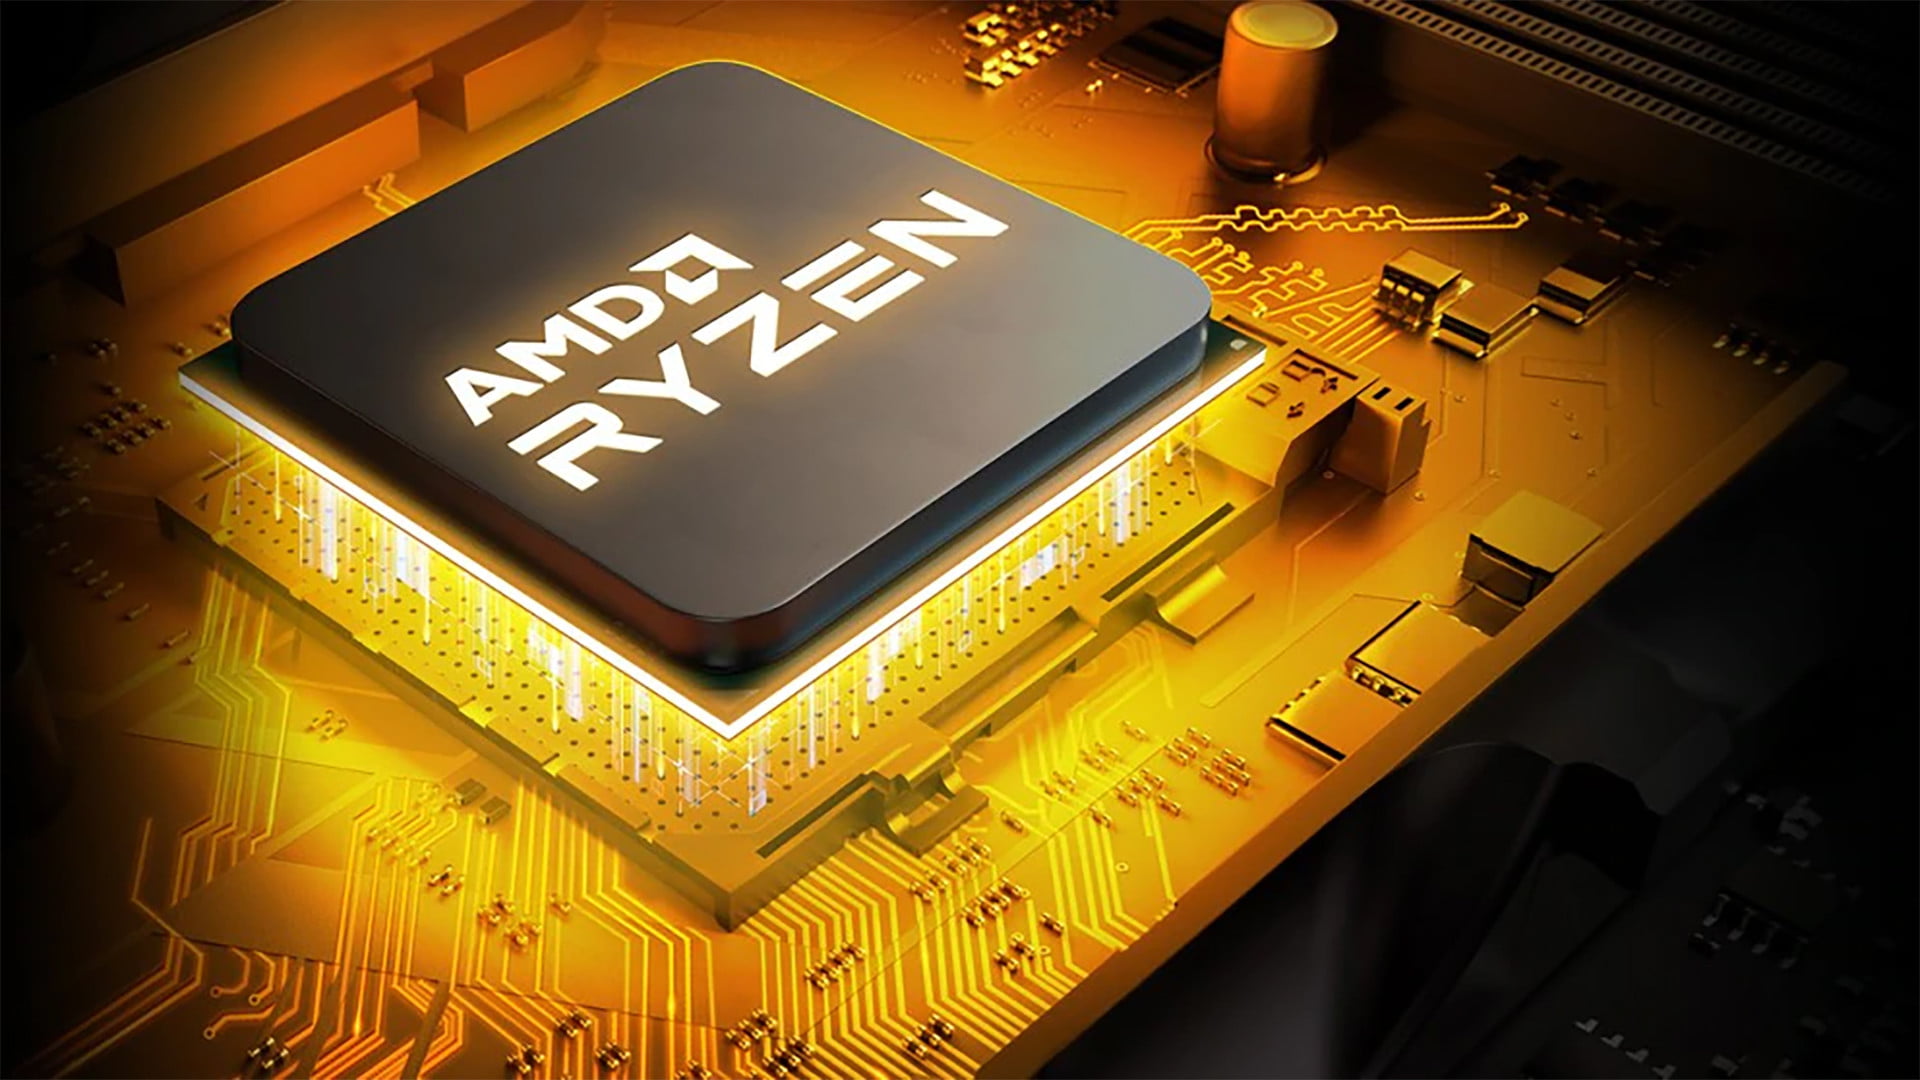 The AMD Ryze 5000 B2 version may prove disappointing